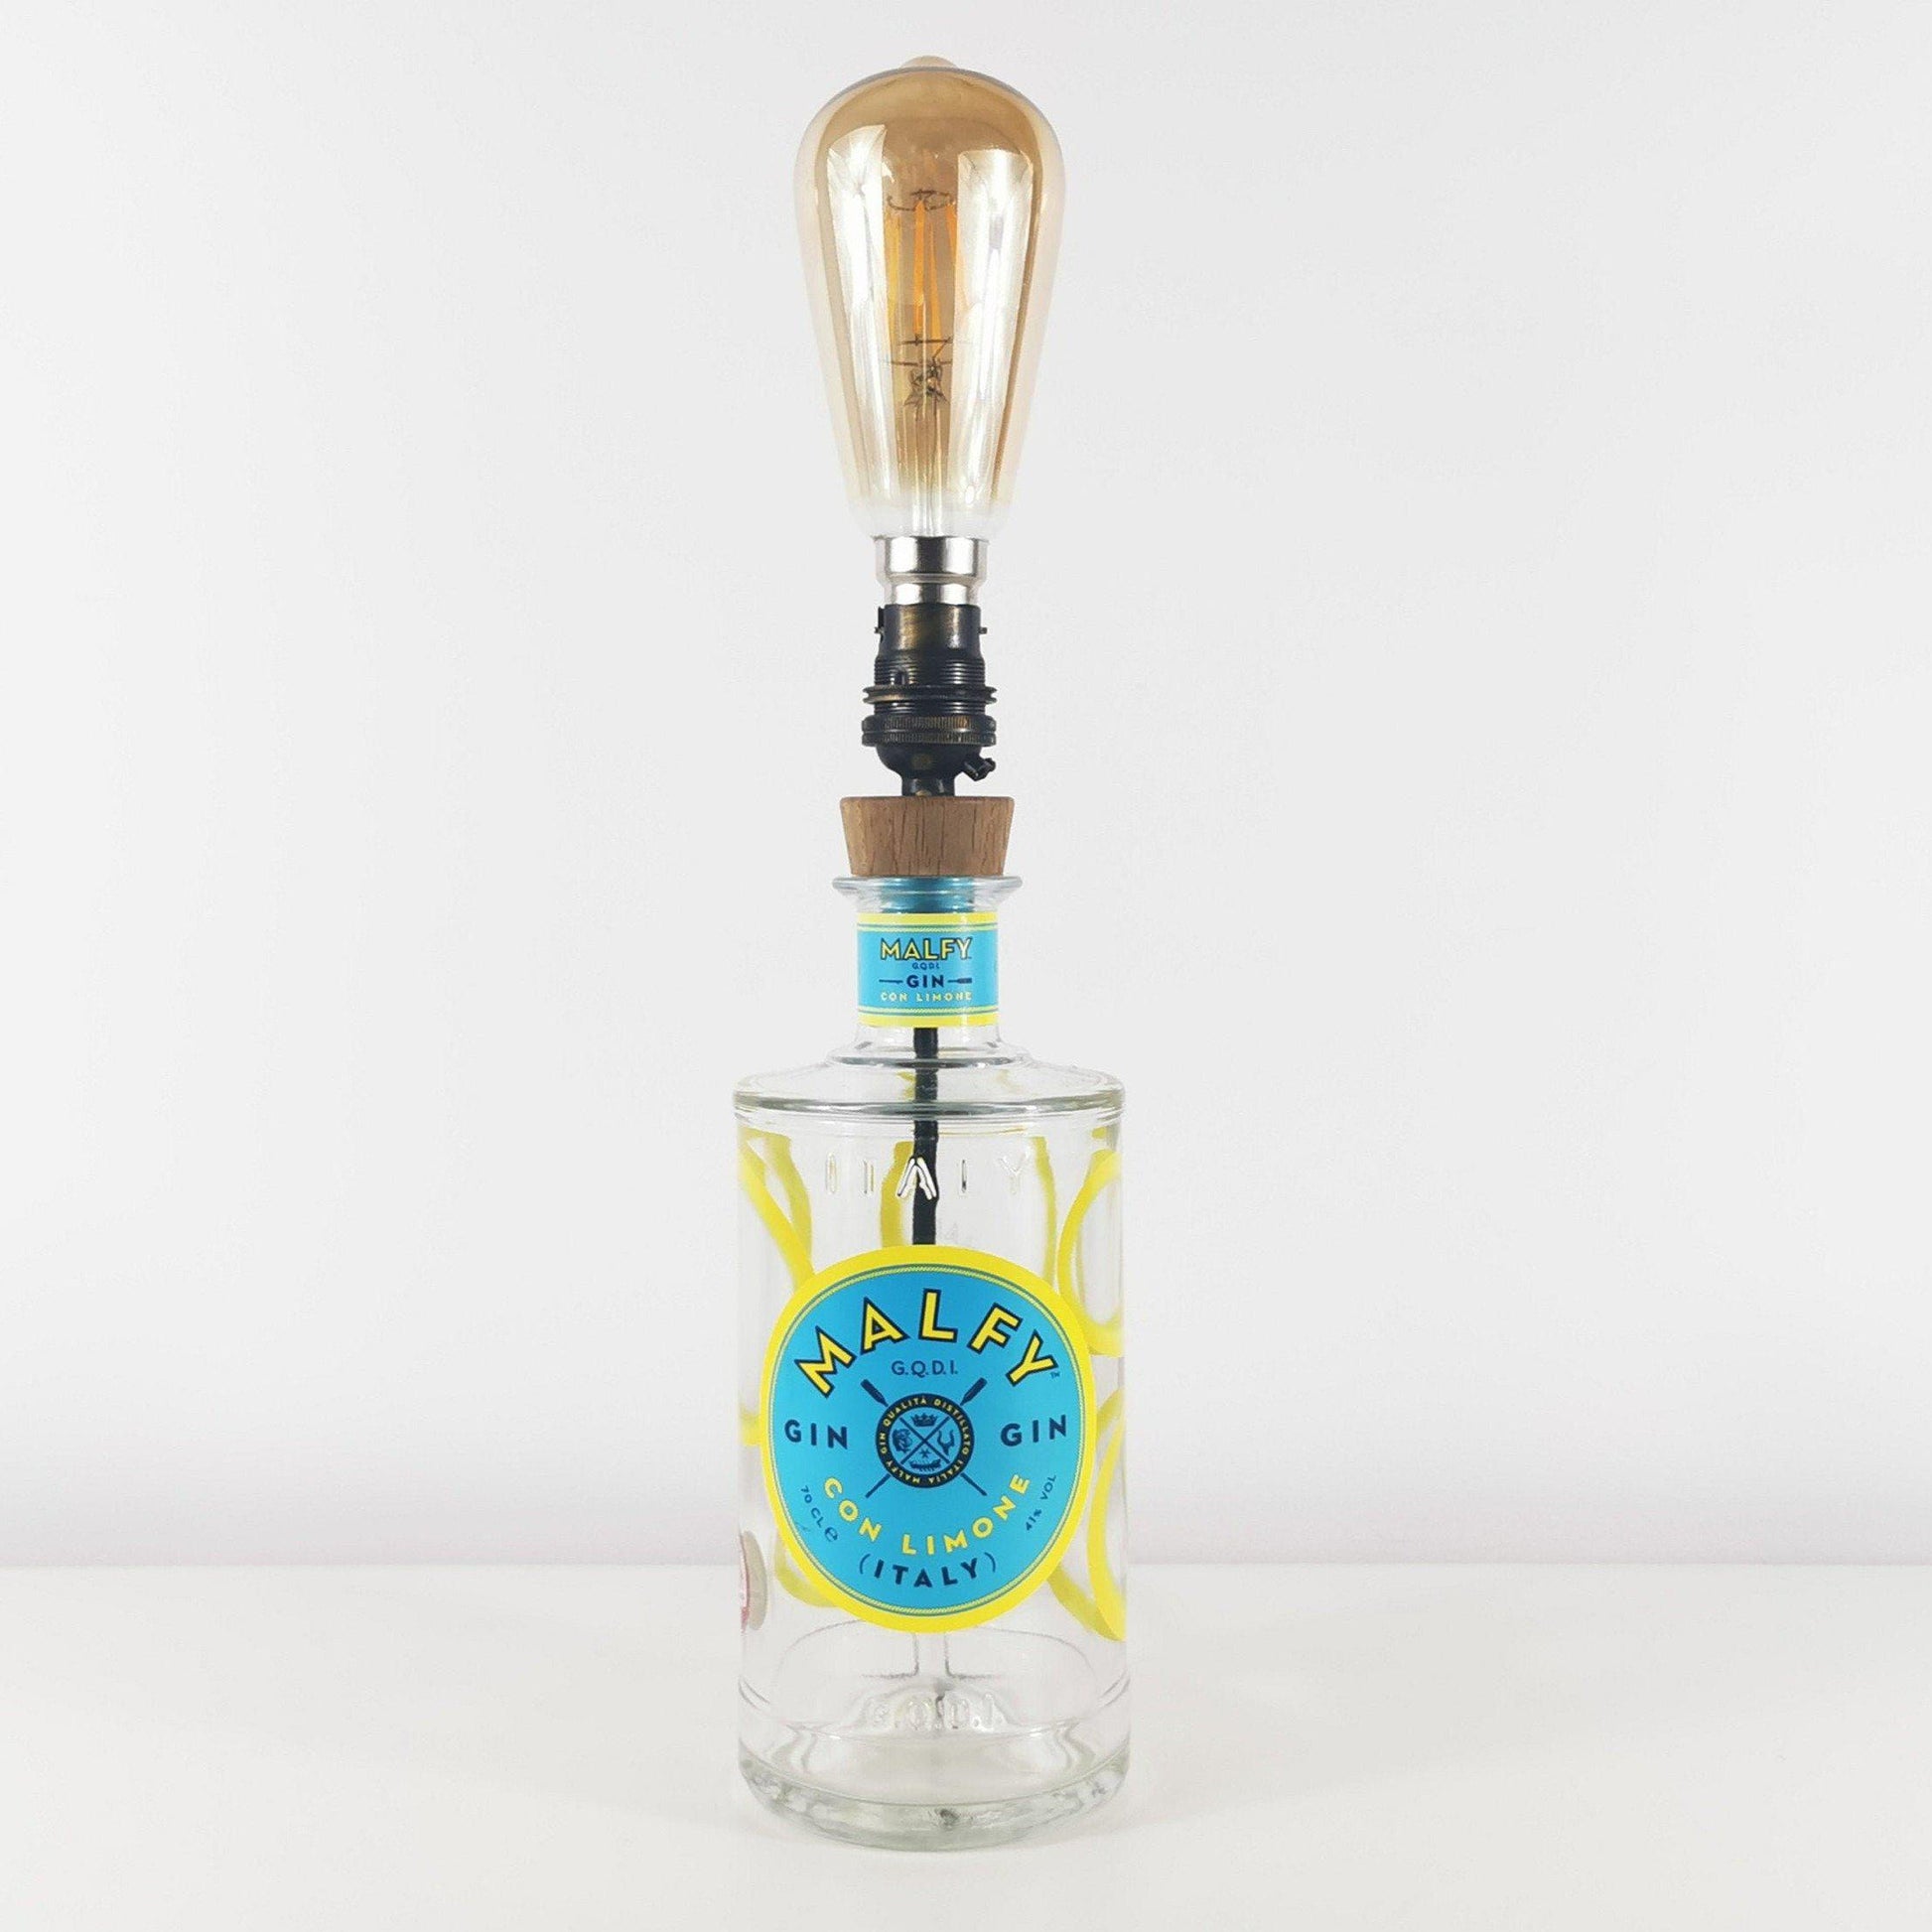 Malfy Con Limone Gin Bottle Table Lamp Gin Bottle Table Lamps